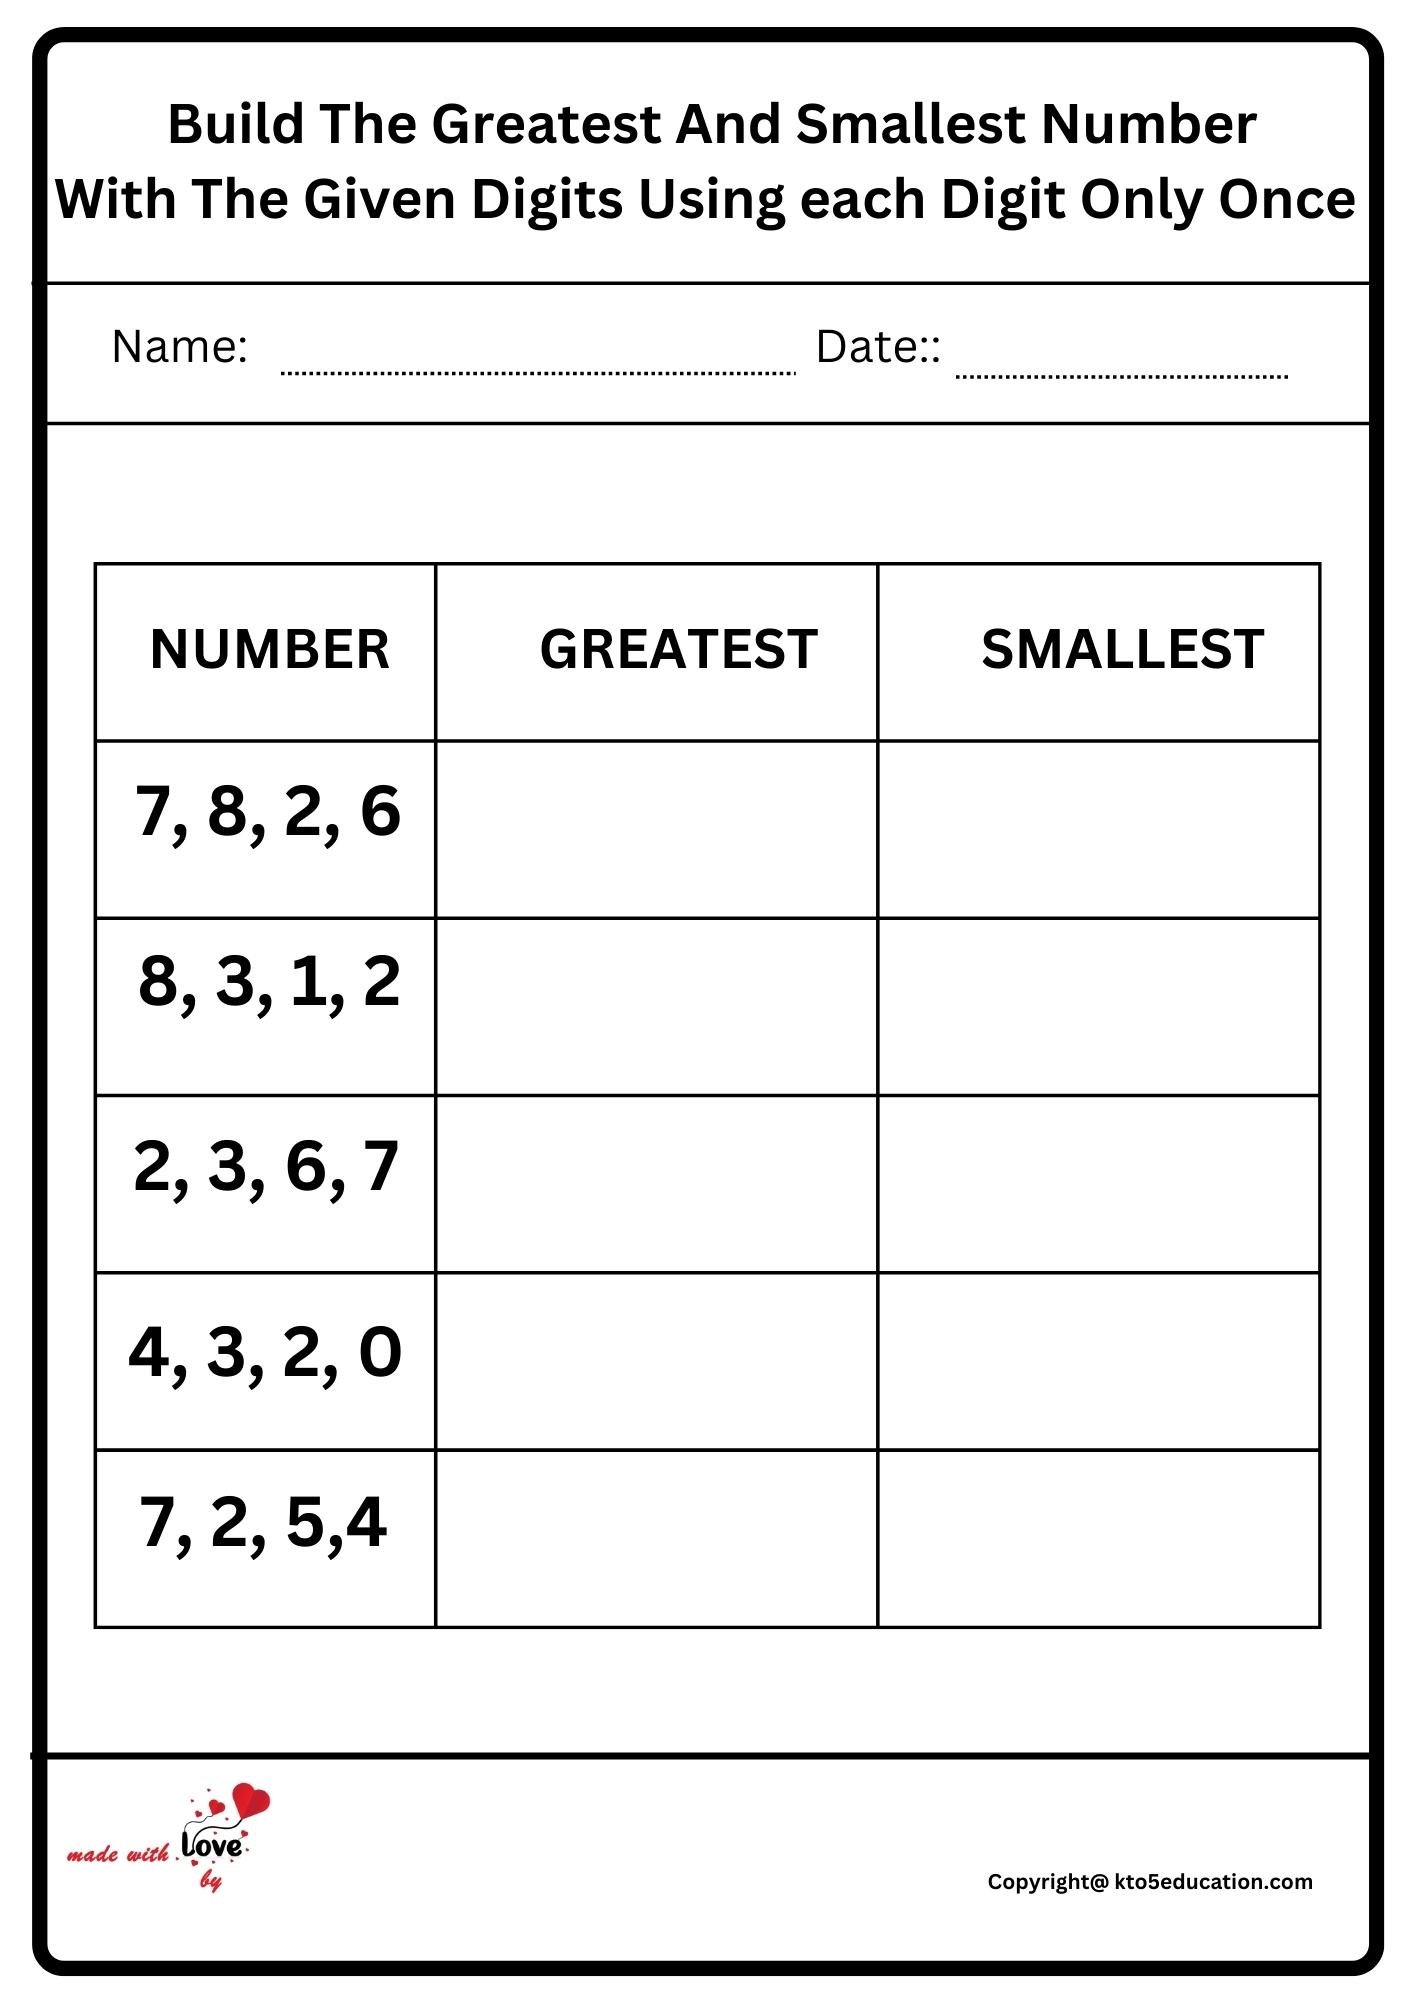 Build The Greatest And Smallest Number With The Given Digits Using Each Digit Only Once Worksheet